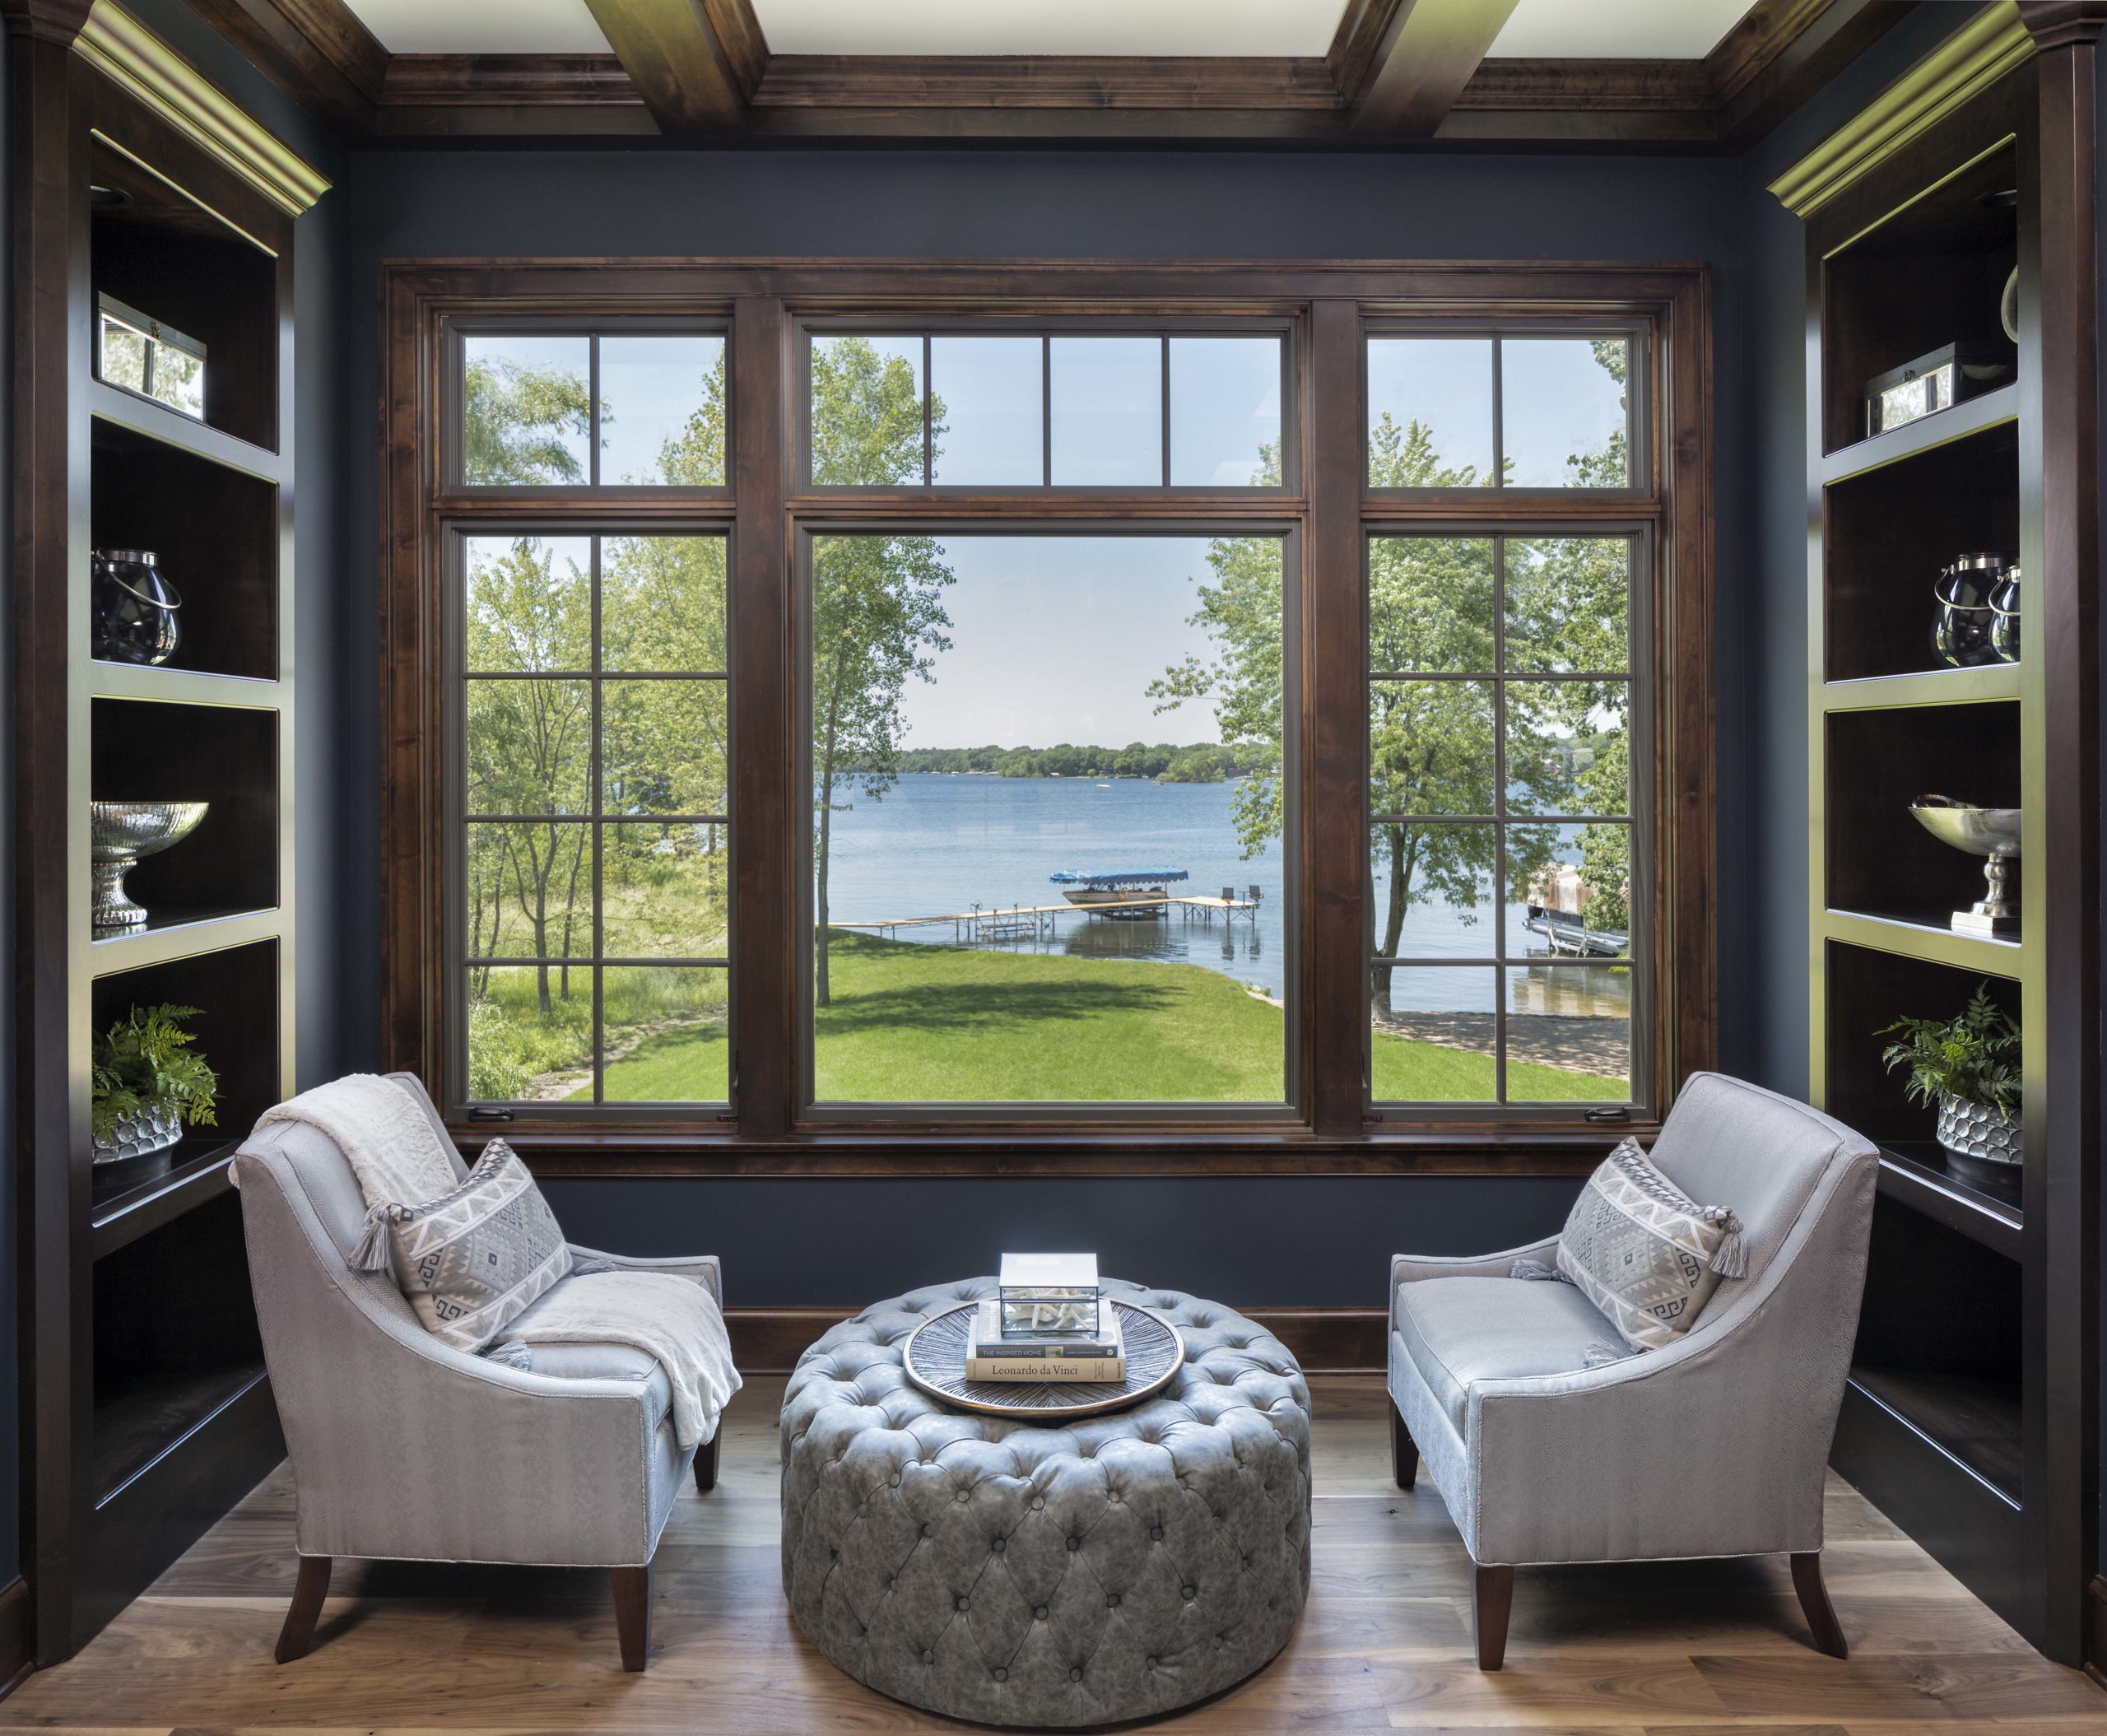 reading nook with two grey chairs and a round ottoman looking out to the lake in the backyard